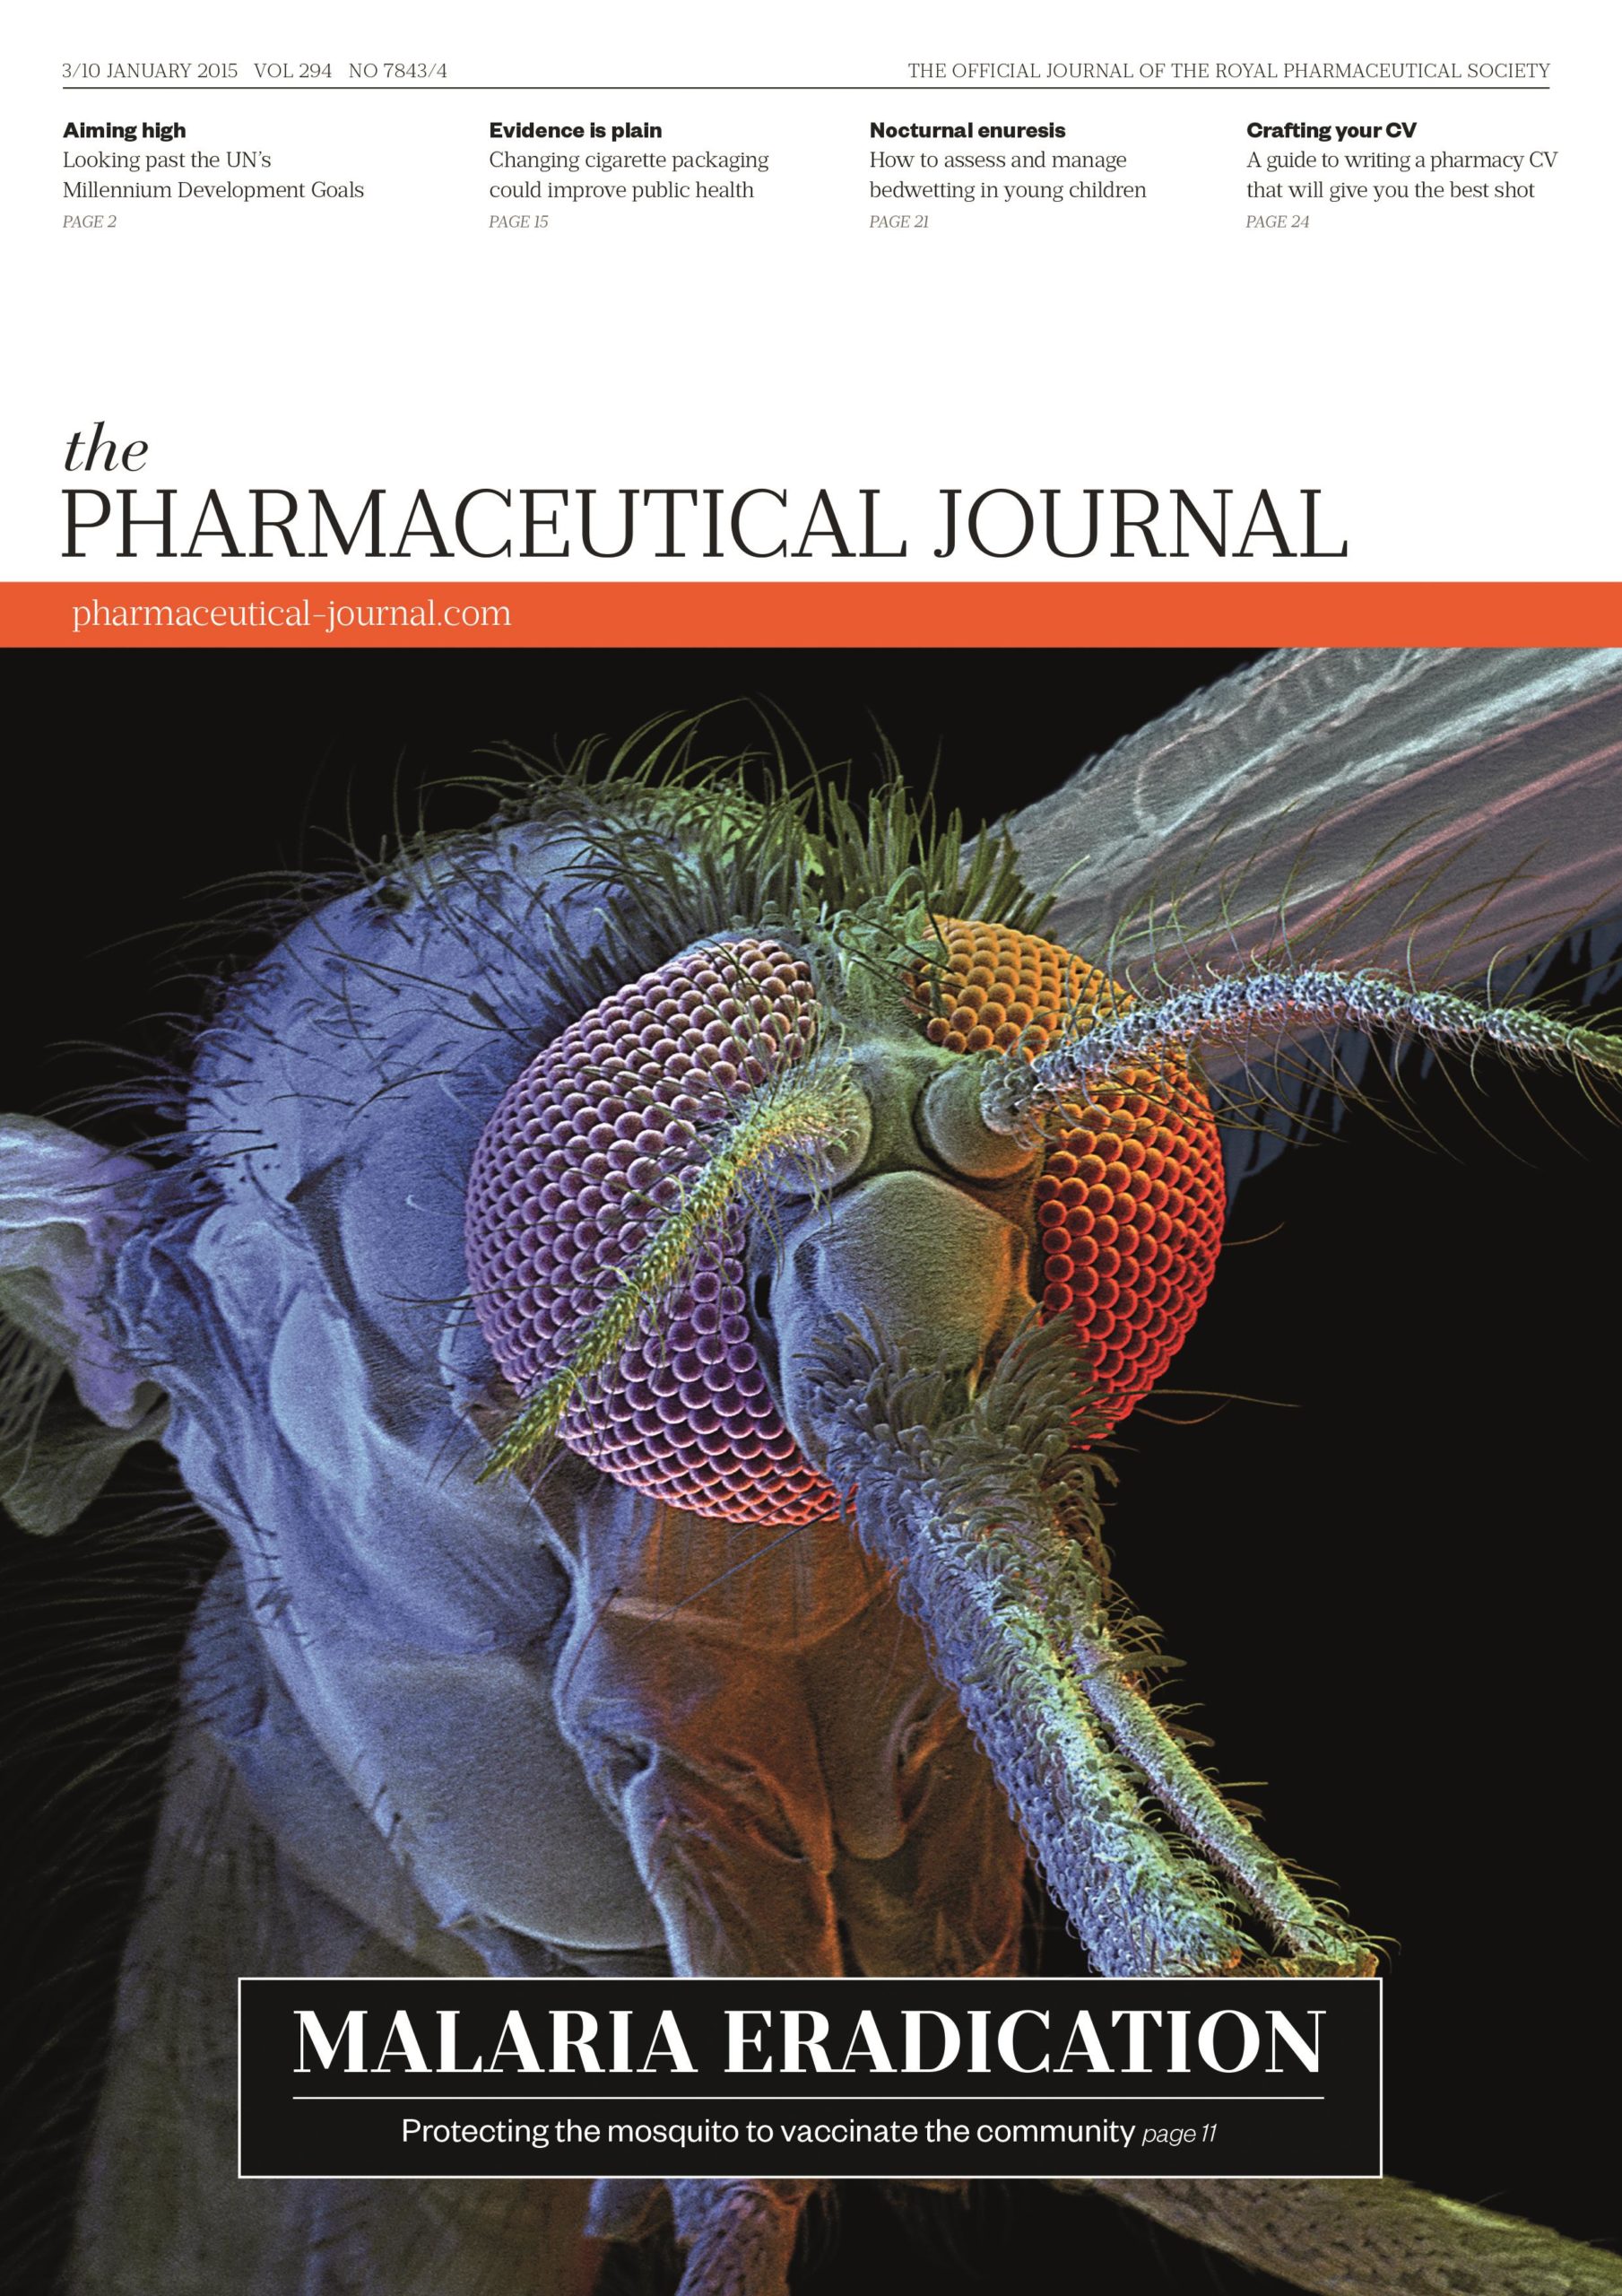 Publication issue cover for PJ, 3/10 January 2015, Vol 294, No 7843/4